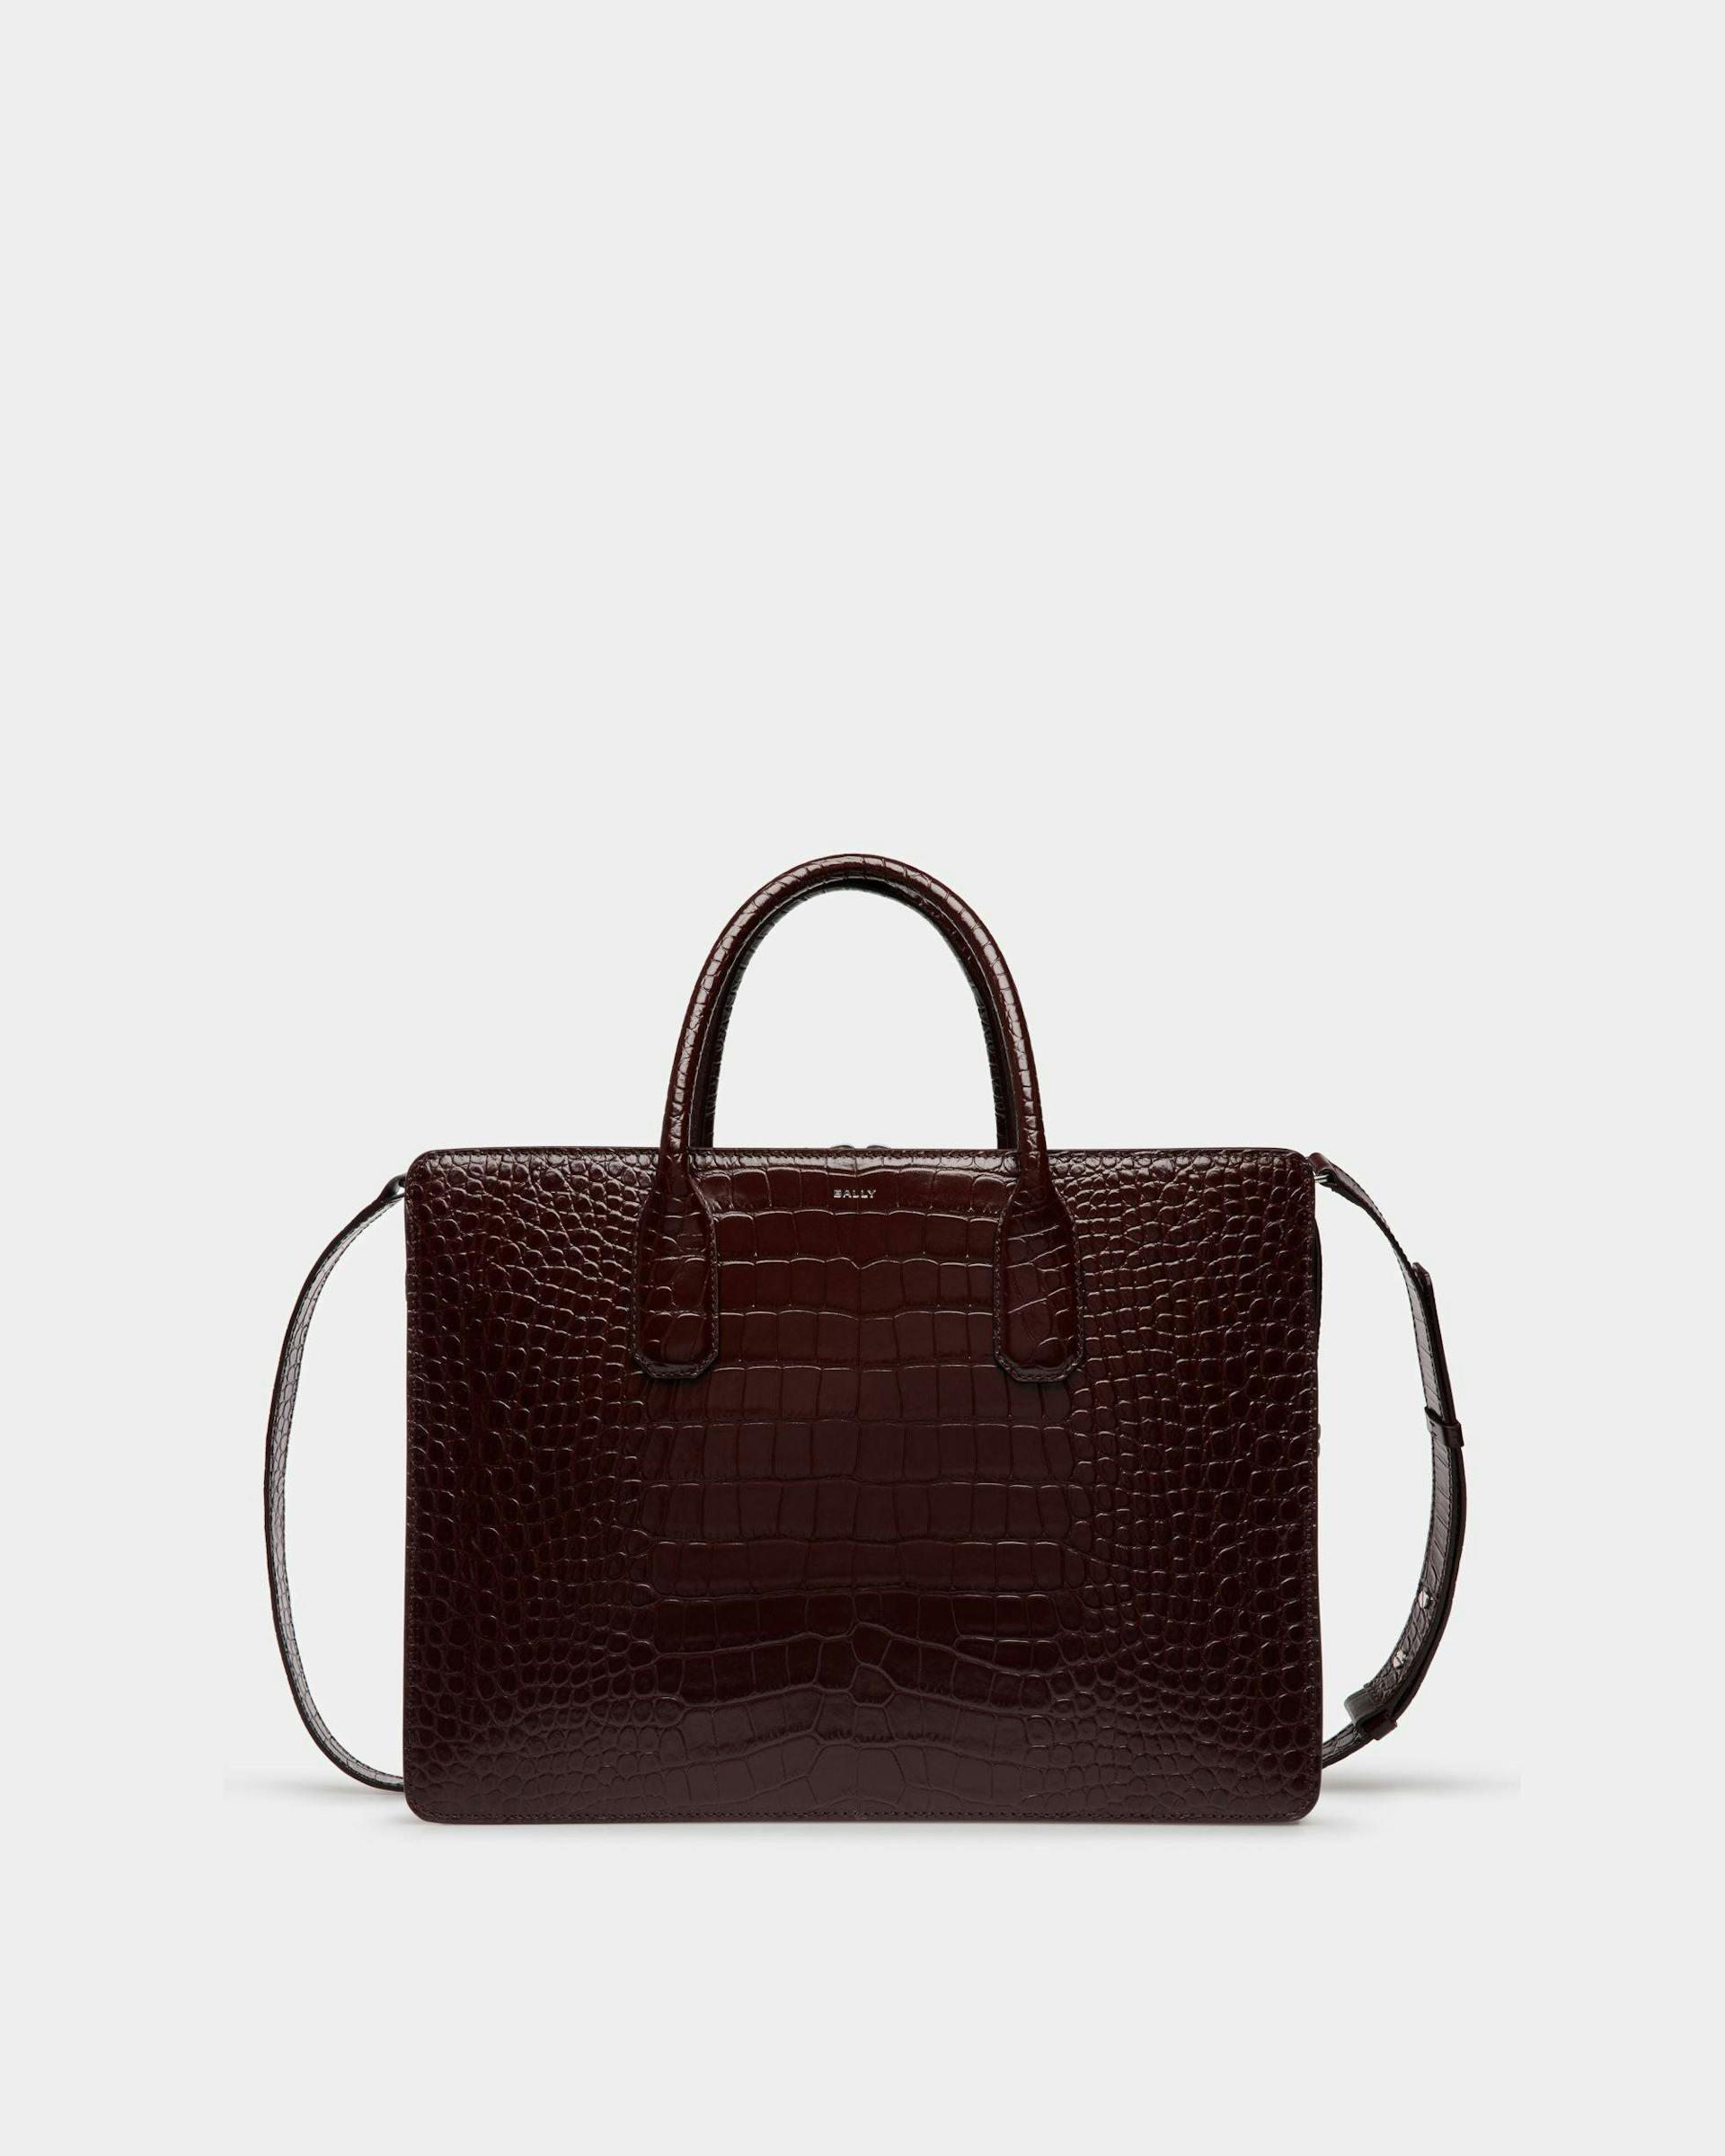 Men's Banque Business Bag In Chablis Leather | Bally | Still Life Front